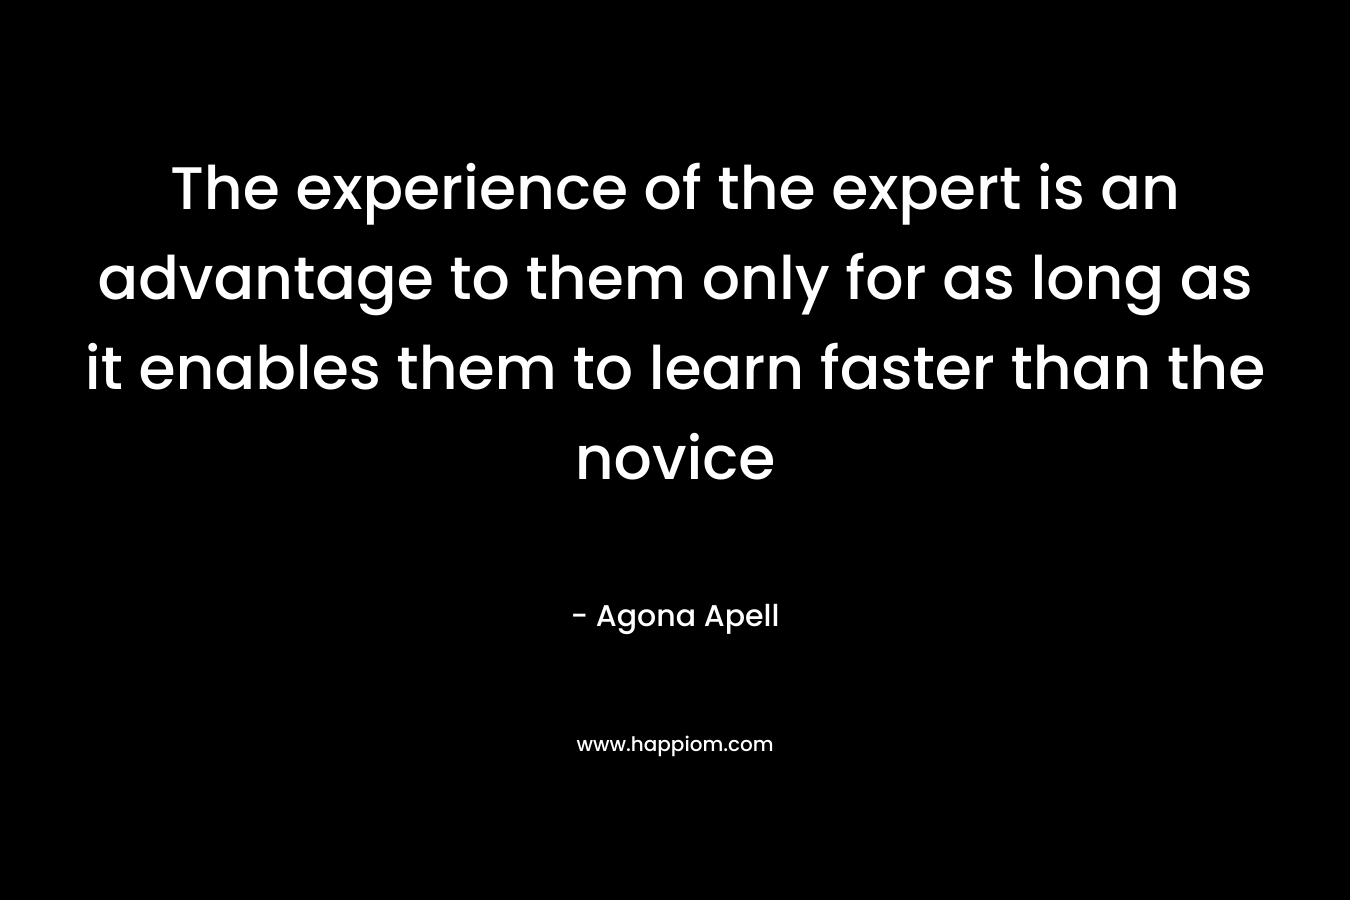 The experience of the expert is an advantage to them only for as long as it enables them to learn faster than the novice